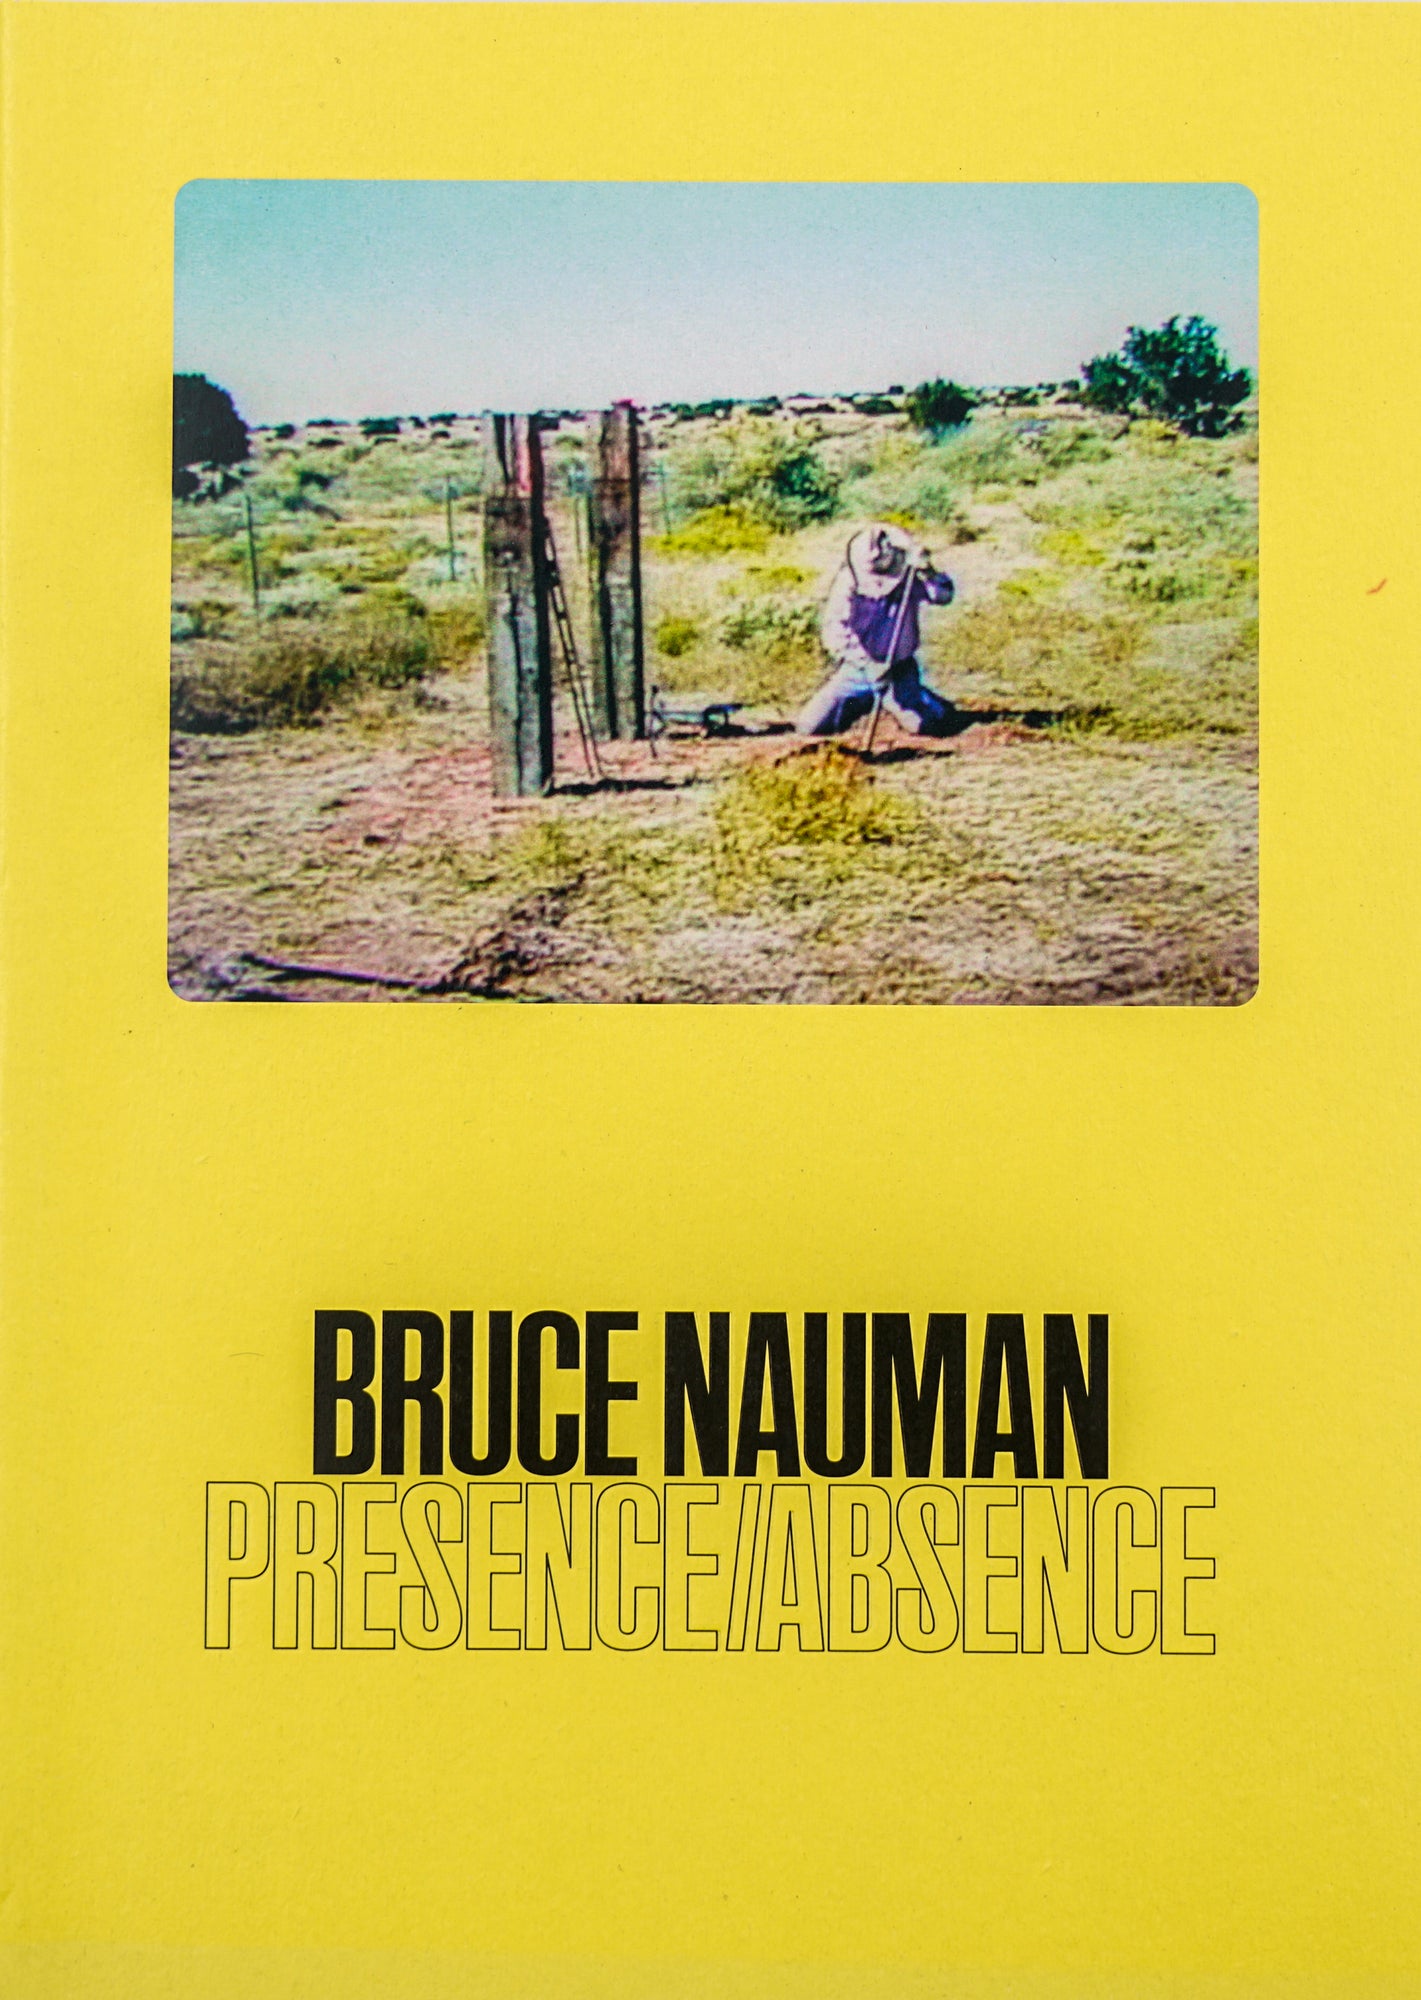 Book cover in monochrome yellow with the title and artist BRUCE NAUMAN PRESENCE/ABSENCE written in sans serif black on the lower half of the page. On the upper half of the picture is a color image of a man kneeling in a field with hills and bushes in the background.